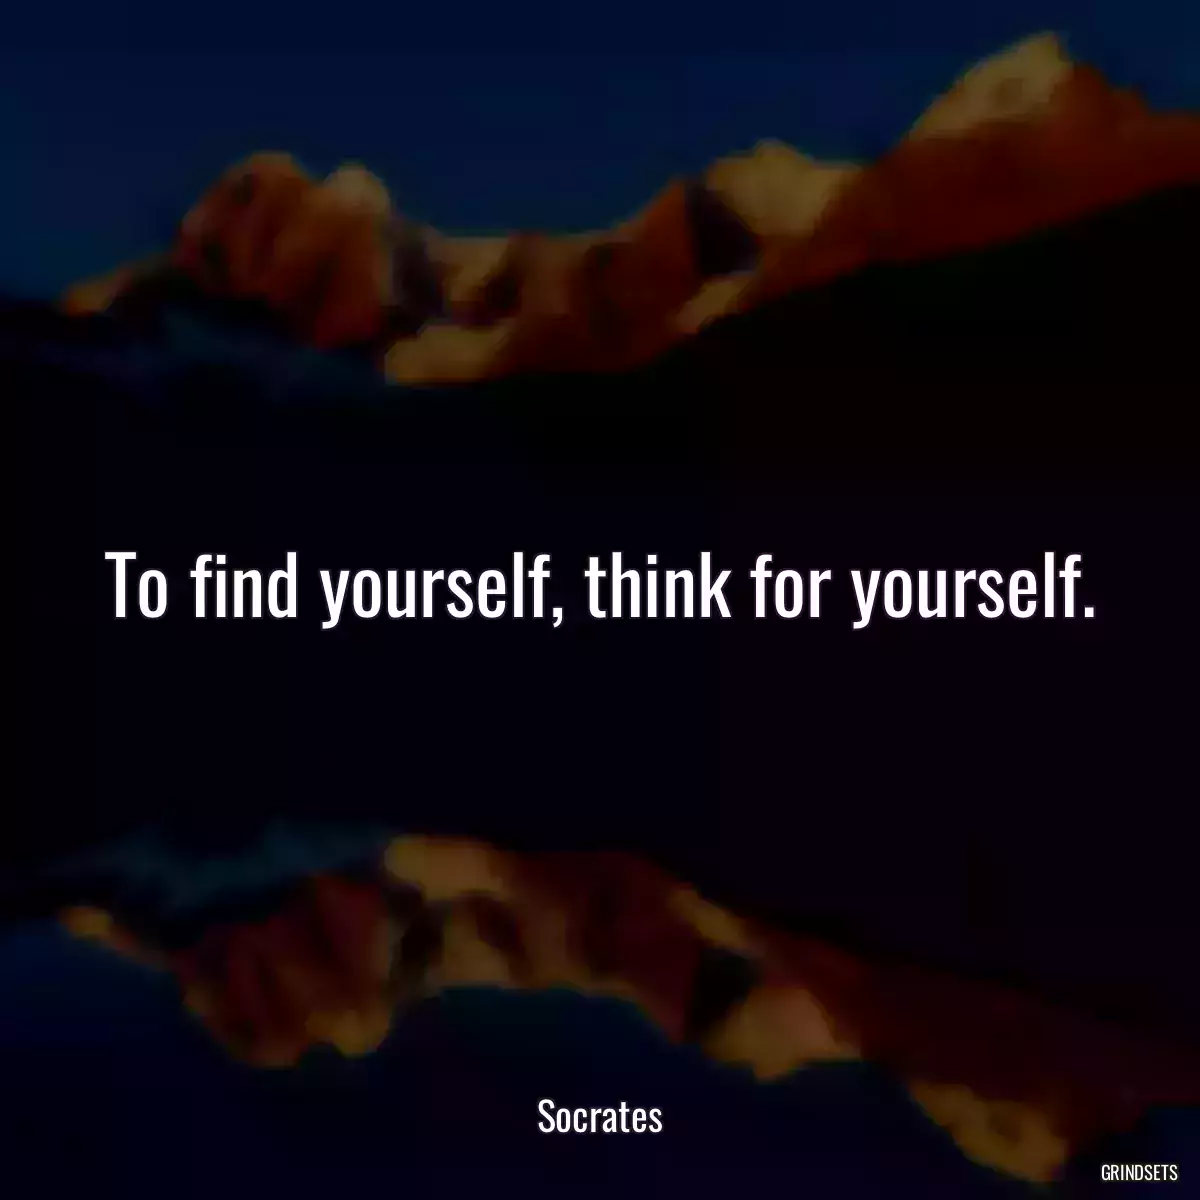 To find yourself, think for yourself.